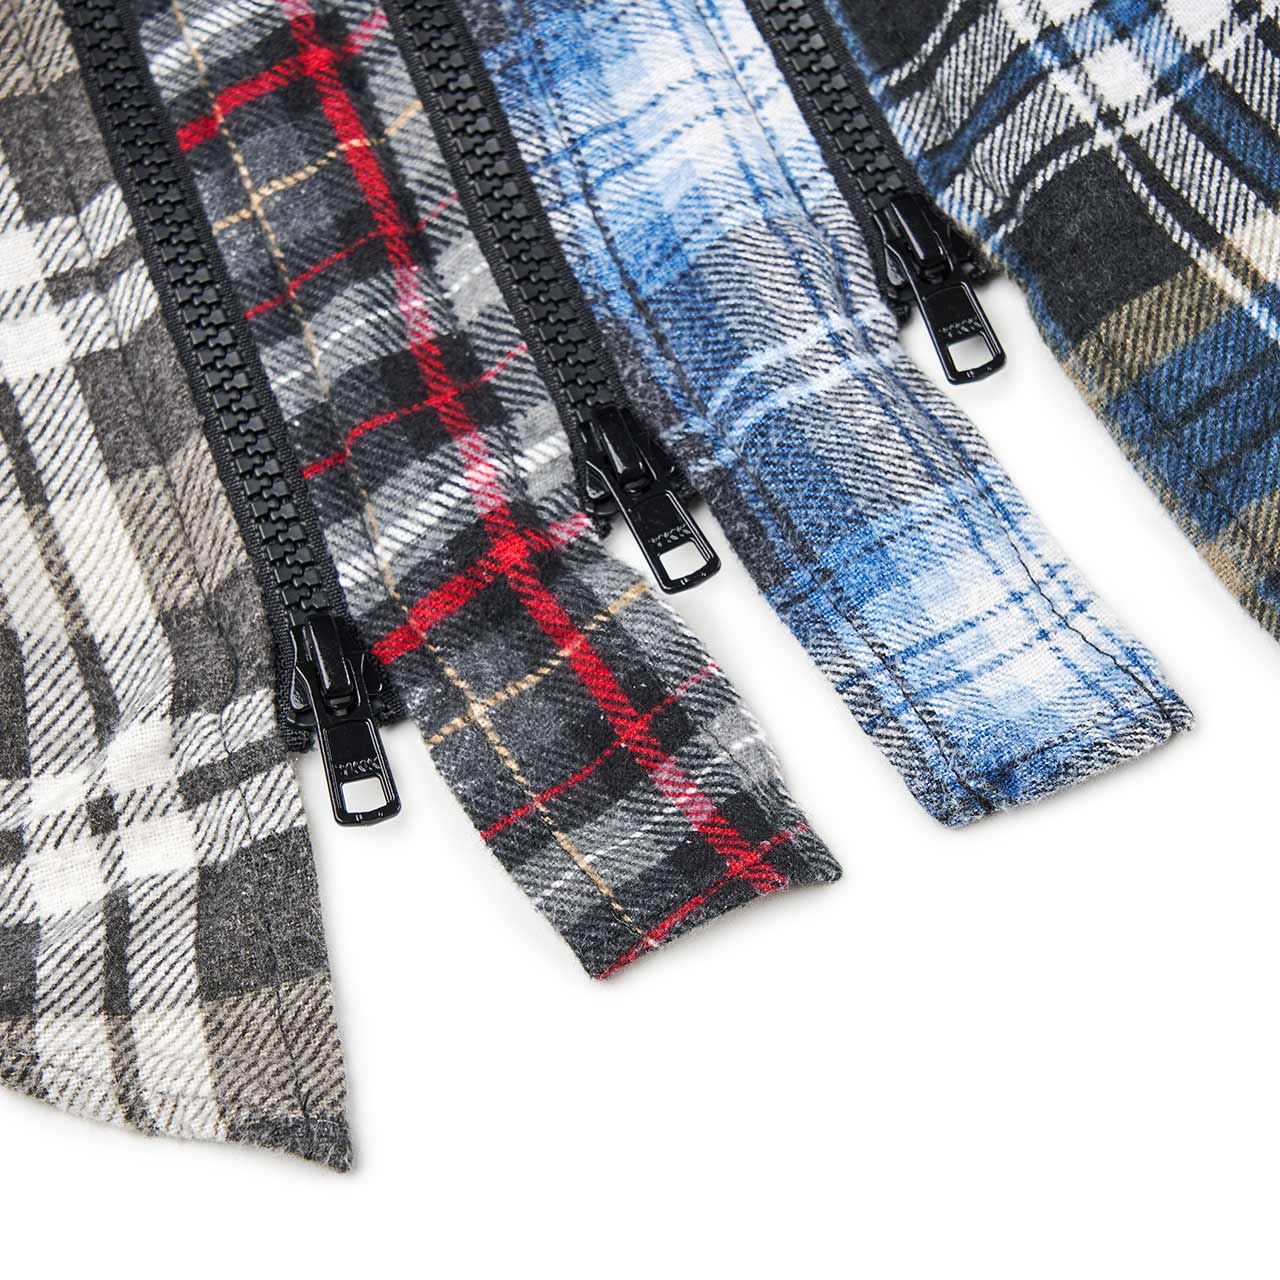 needles rebuild by needles 7 cuts zipped flannel shirt